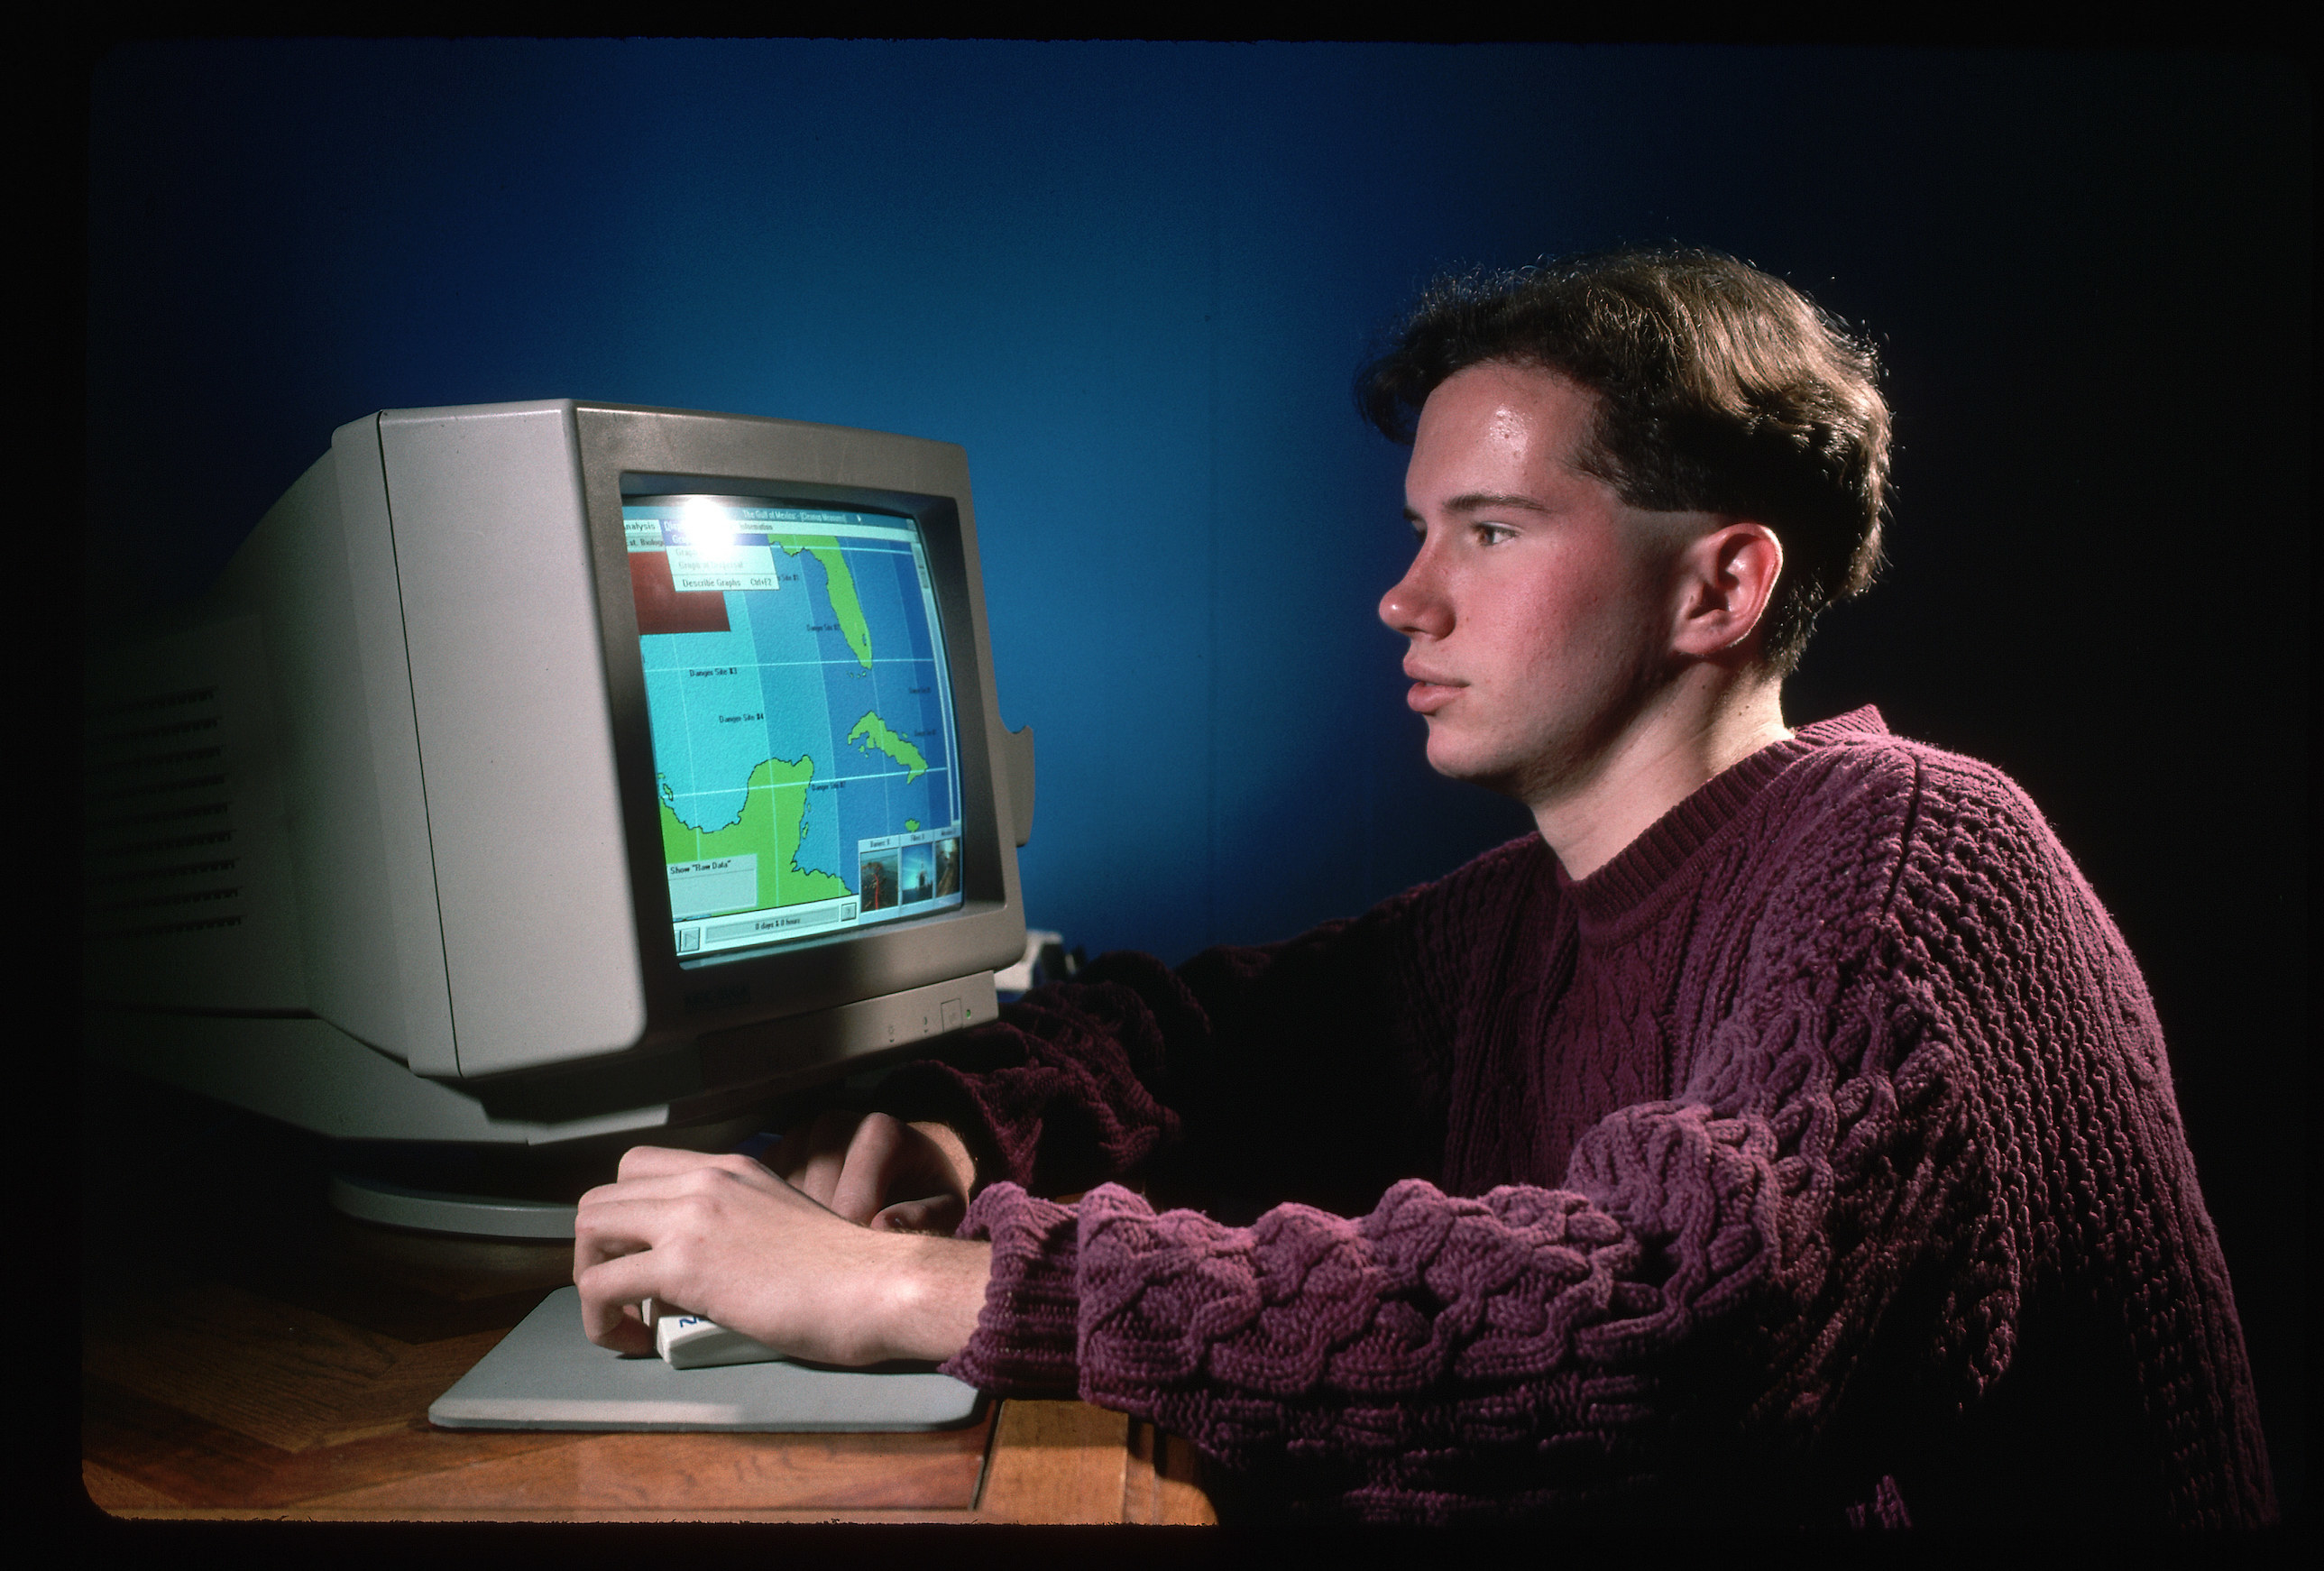 A young person at a computer with a small screen